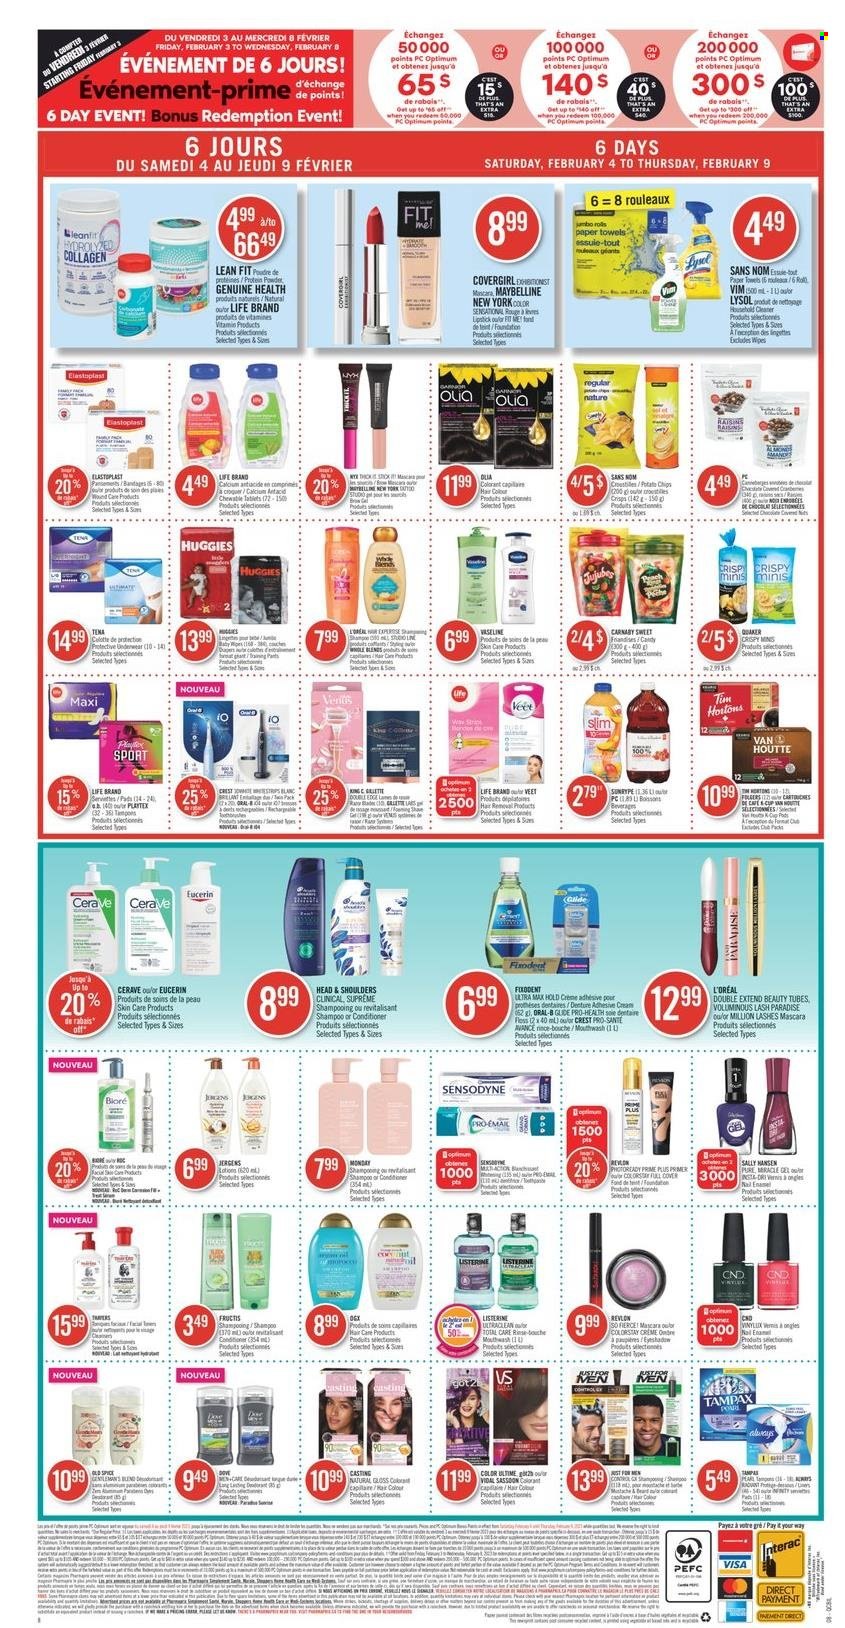 thumbnail - Pharmaprix Flyer - February 04, 2023 - February 09, 2023 - Sales products - pears, Quaker, strips, Dove, potato chips, chips, spice, oil, dried fruit, Folgers, wipes, baby wipes, kitchen towels, paper towels, cleaner, Lysol, Vaseline, mouthwash, Fixodent, Crest, Playtex, tampons, CeraVe, L’Oréal, NYX Cosmetics, conditioner, Revlon, Head & Shoulders, hair color, Fructis, Jergens, Veet, eyeshadow, mascara, Maybelline, cup, Optimum, whey protein, Eucerin, Listerine, raisins, Sally Hansen, shampoo, Tampax, Huggies, Old Spice, Oral-B, Sensodyne. Page 18.